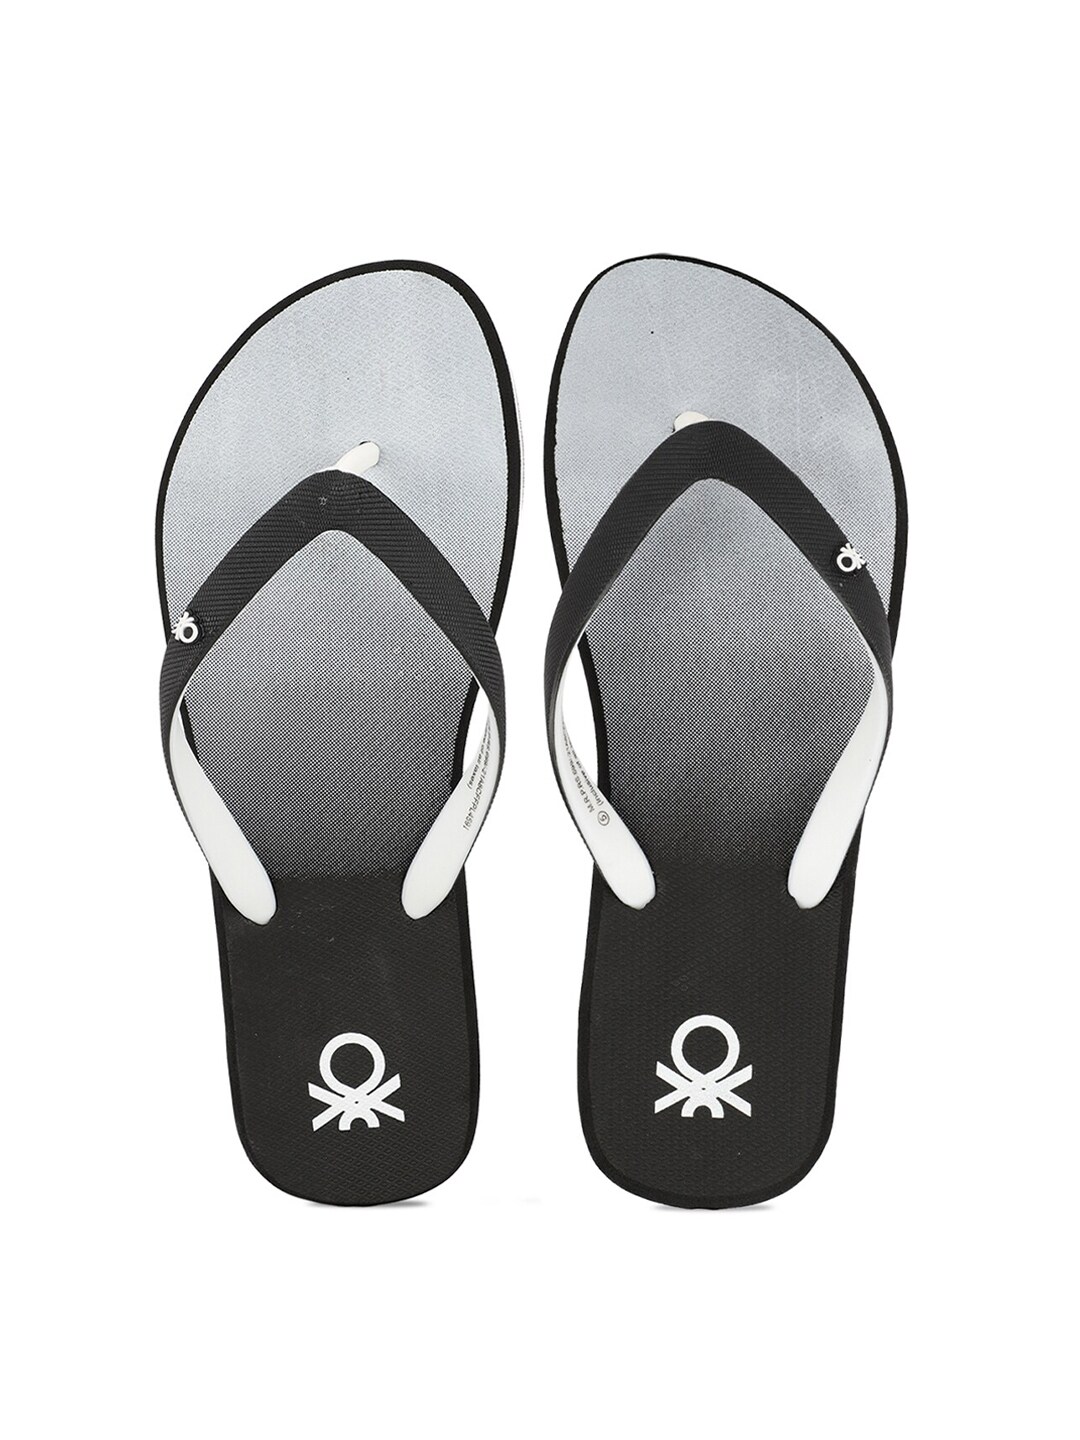 United Colors of Benetton Women Black & Grey Colourblocked Thong Flip-Flops Price in India